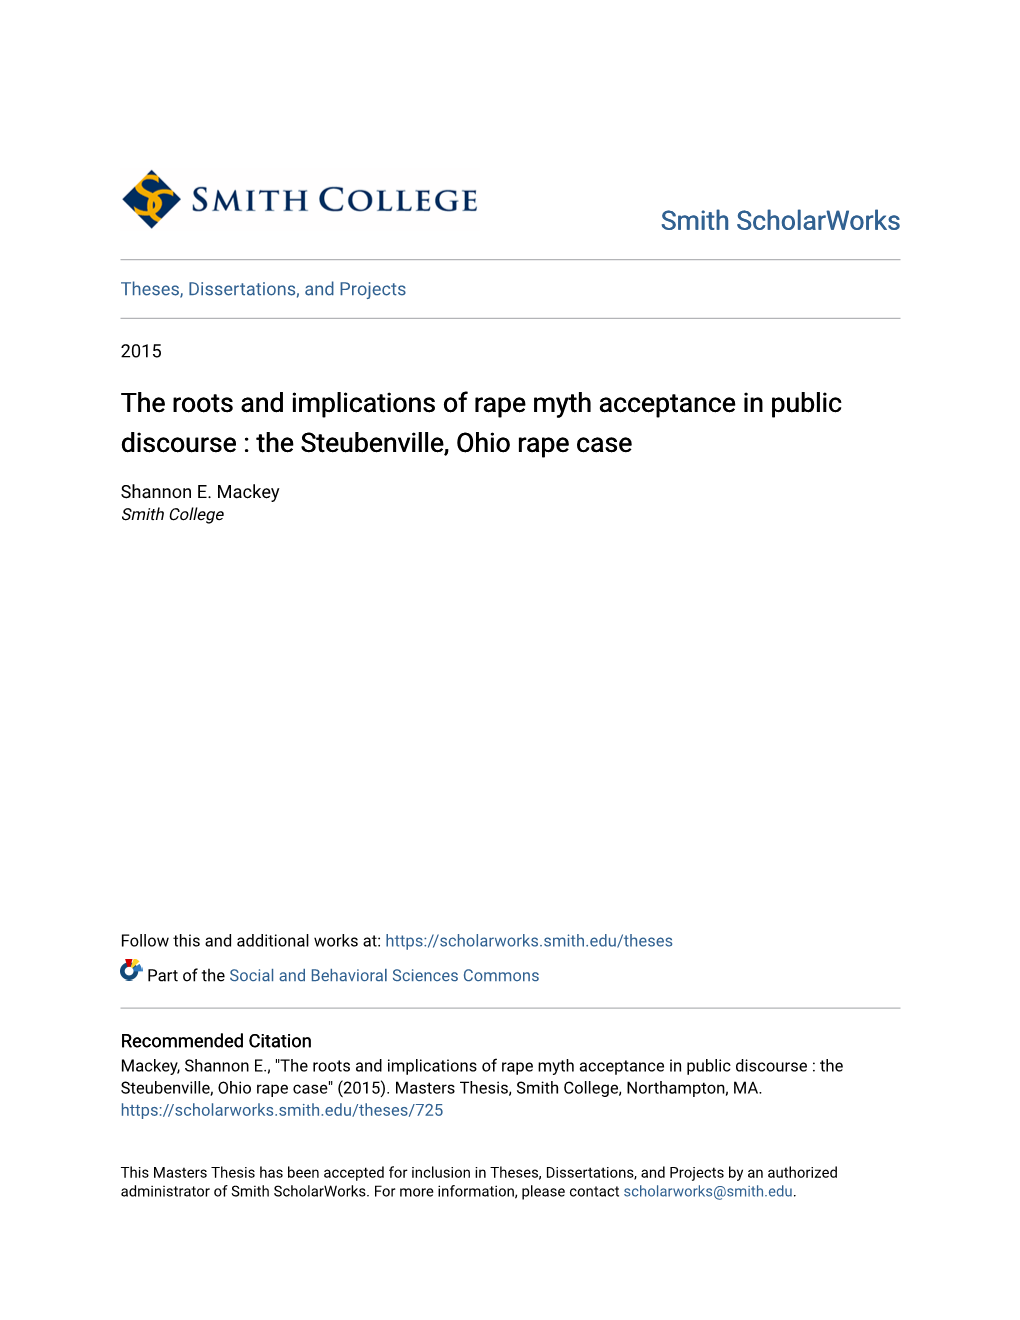 The Roots and Implications of Rape Myth Acceptance in Public Discourse : the Steubenville, Ohio Rape Case